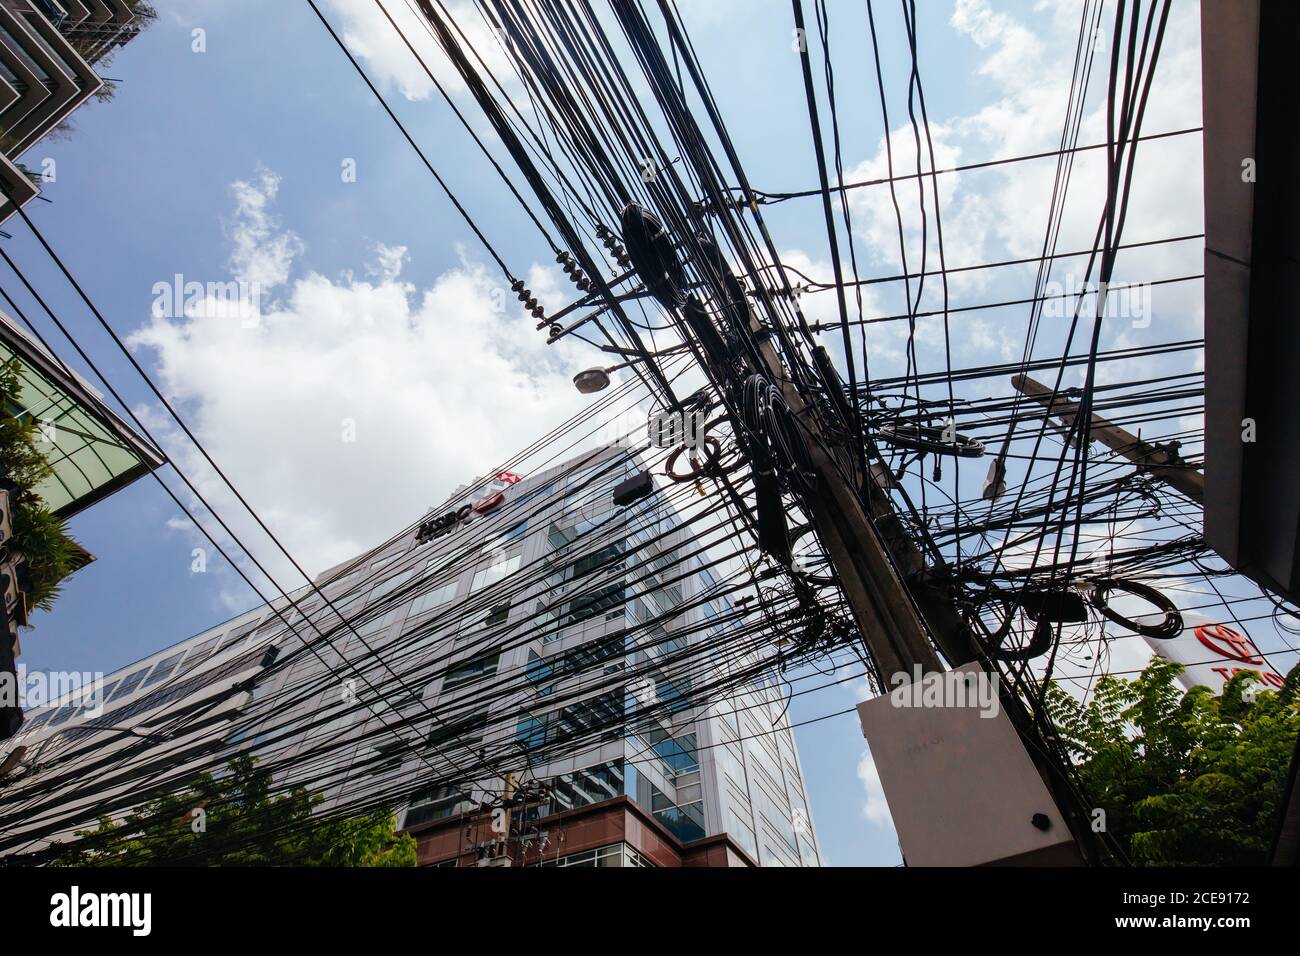 Crowded Power Pole in Thailand Stock Photo